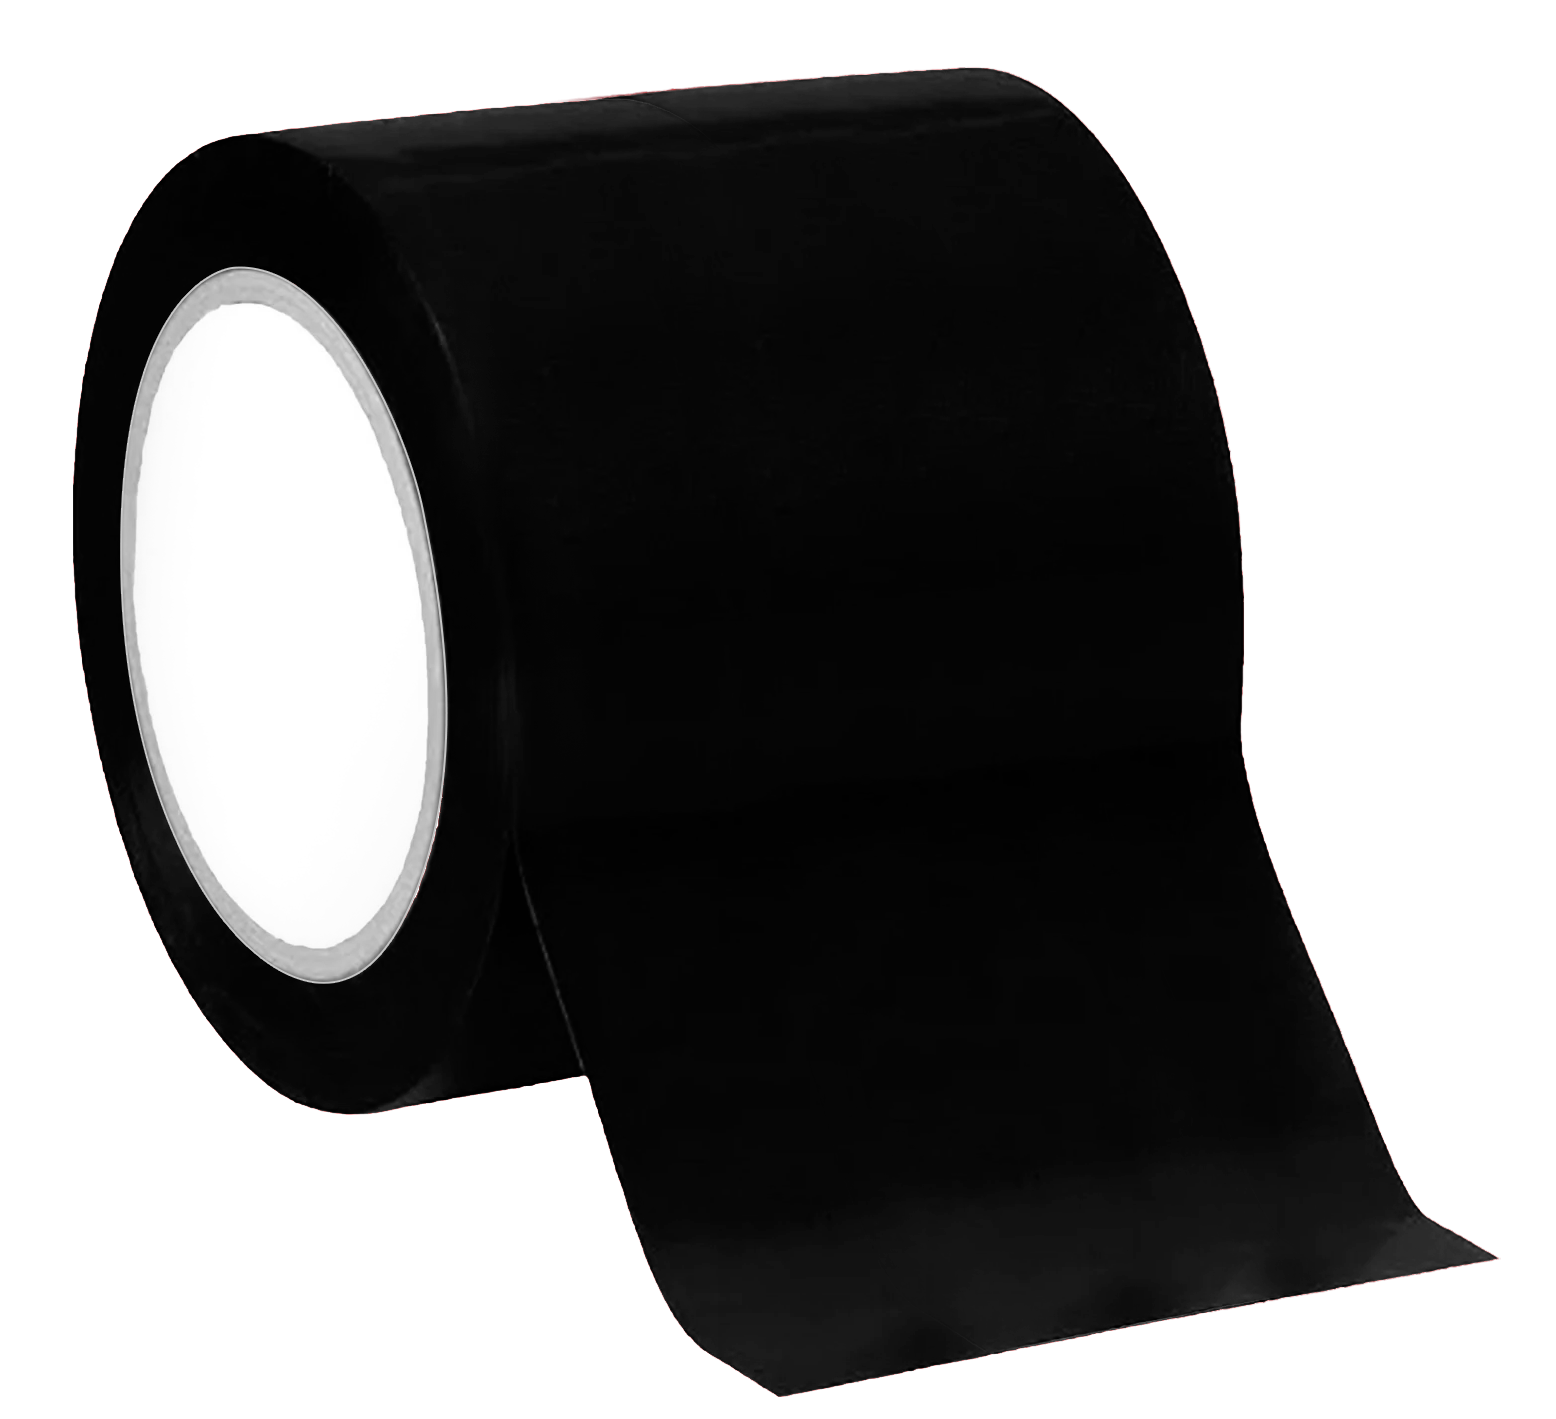 Roll Out / Wrestling Mat Tape Black - 1 Roll